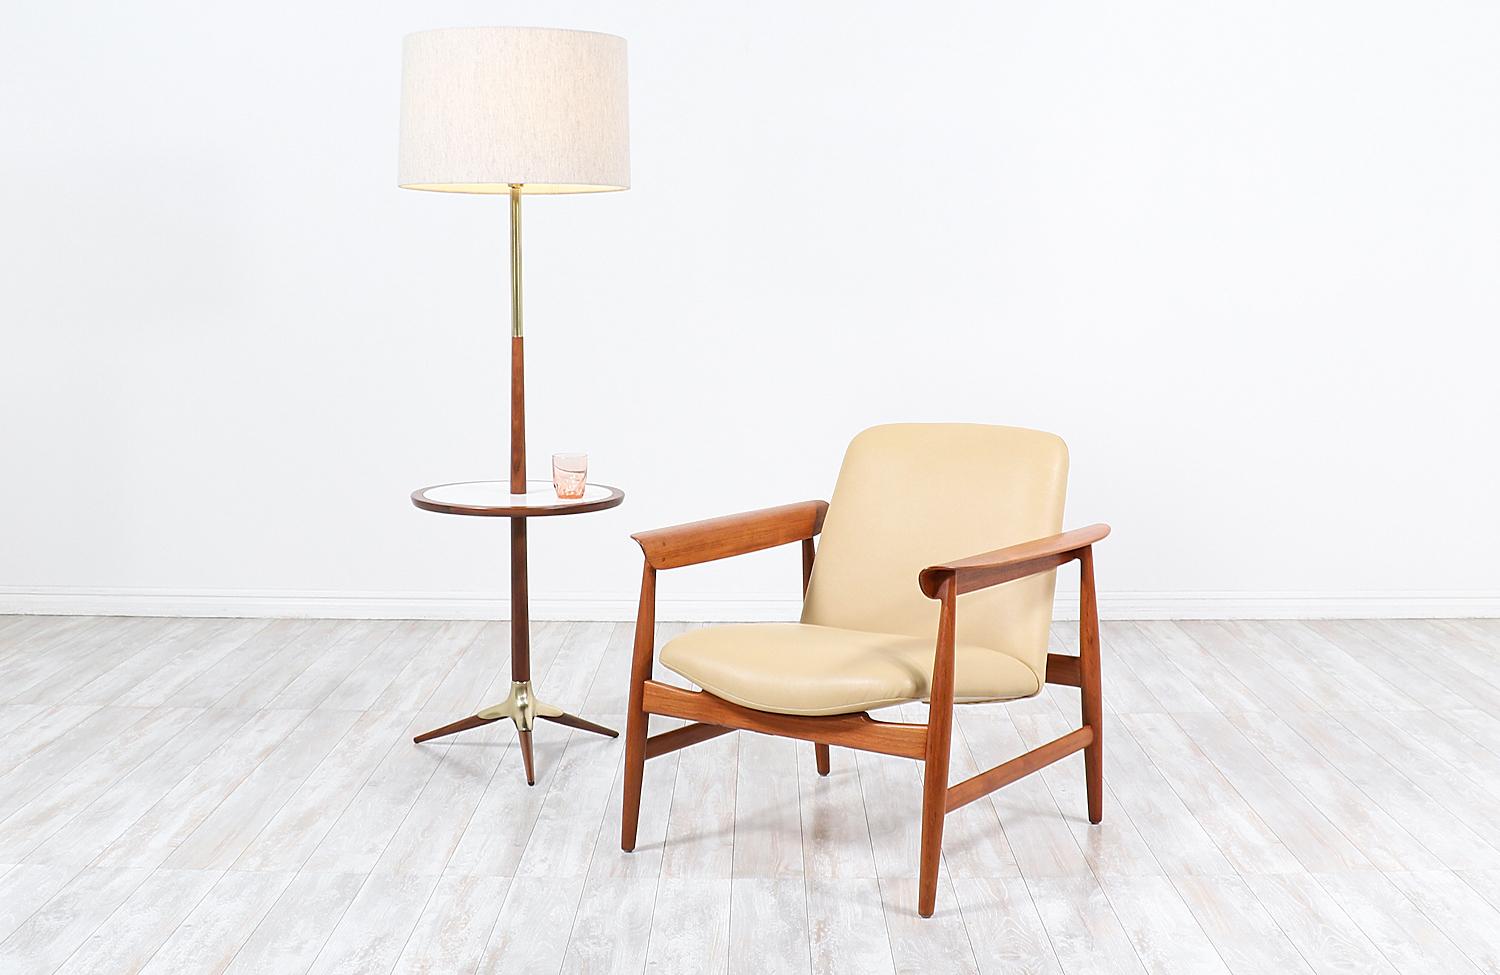 Mid-Century Modern walnut & brass tripod floor lamp with side table
Dimensions
60in H x 18in W x 18in D 
Lamp shade: 12in H x 18in W 
Side table height: 22.25in.

_________________________________________________________________

Transforming a